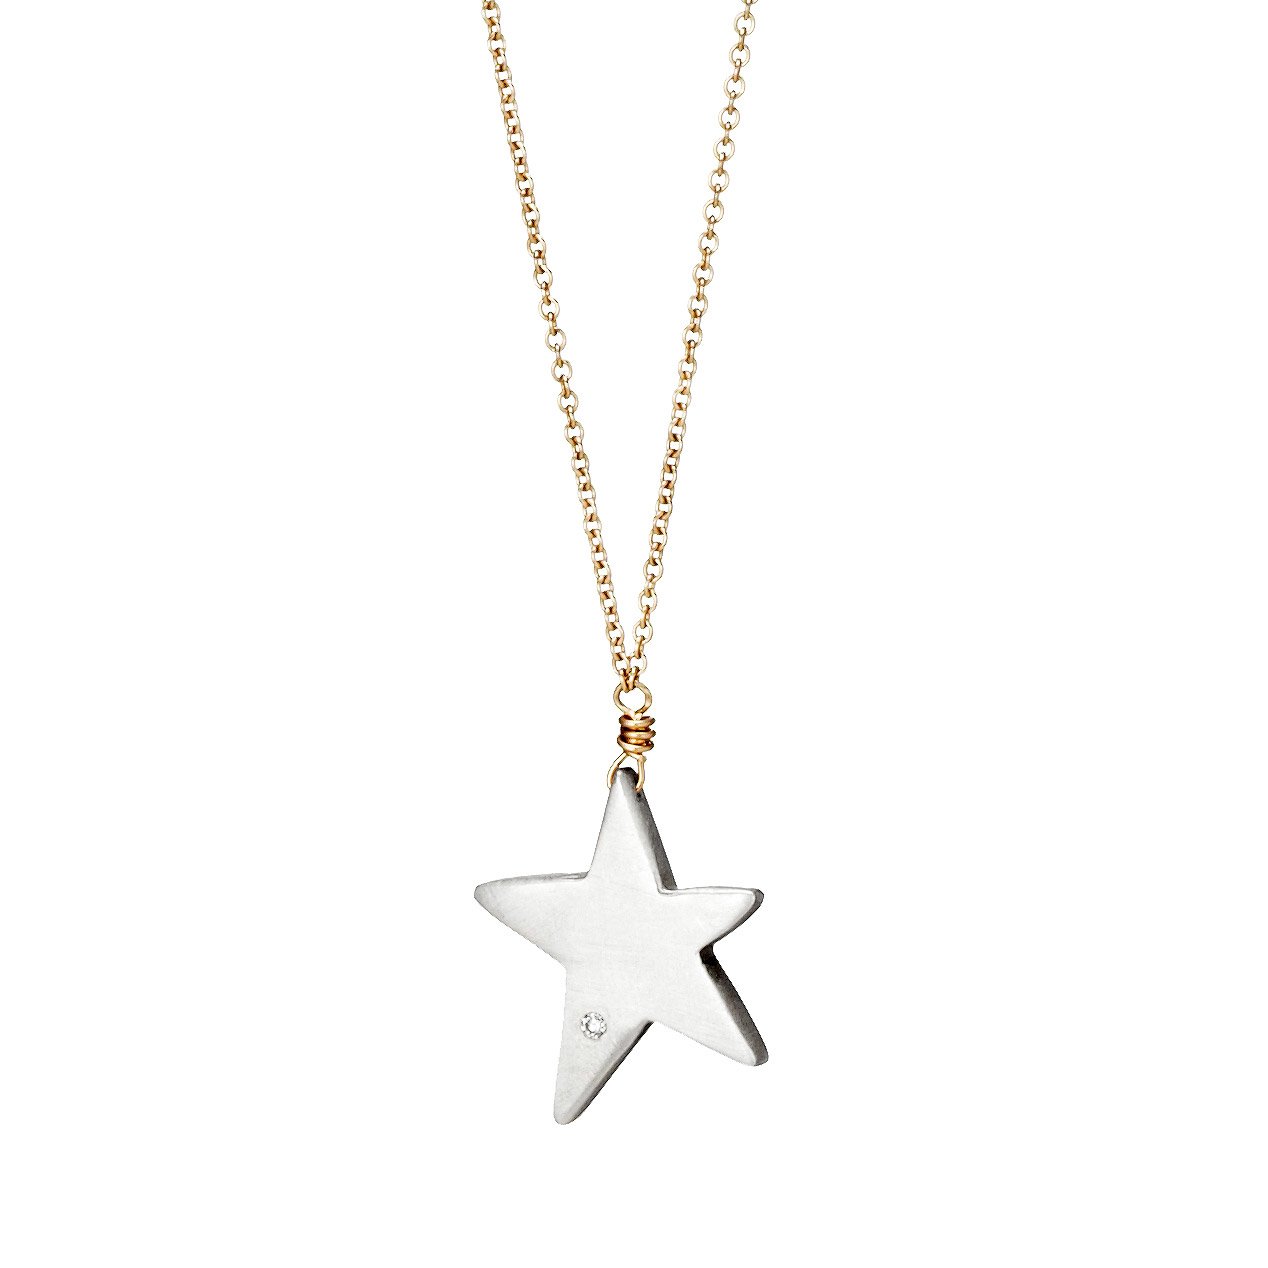 Wish Upon A Star Diamond Necklace | Silver Pendant Jewelry | UncommonGoods